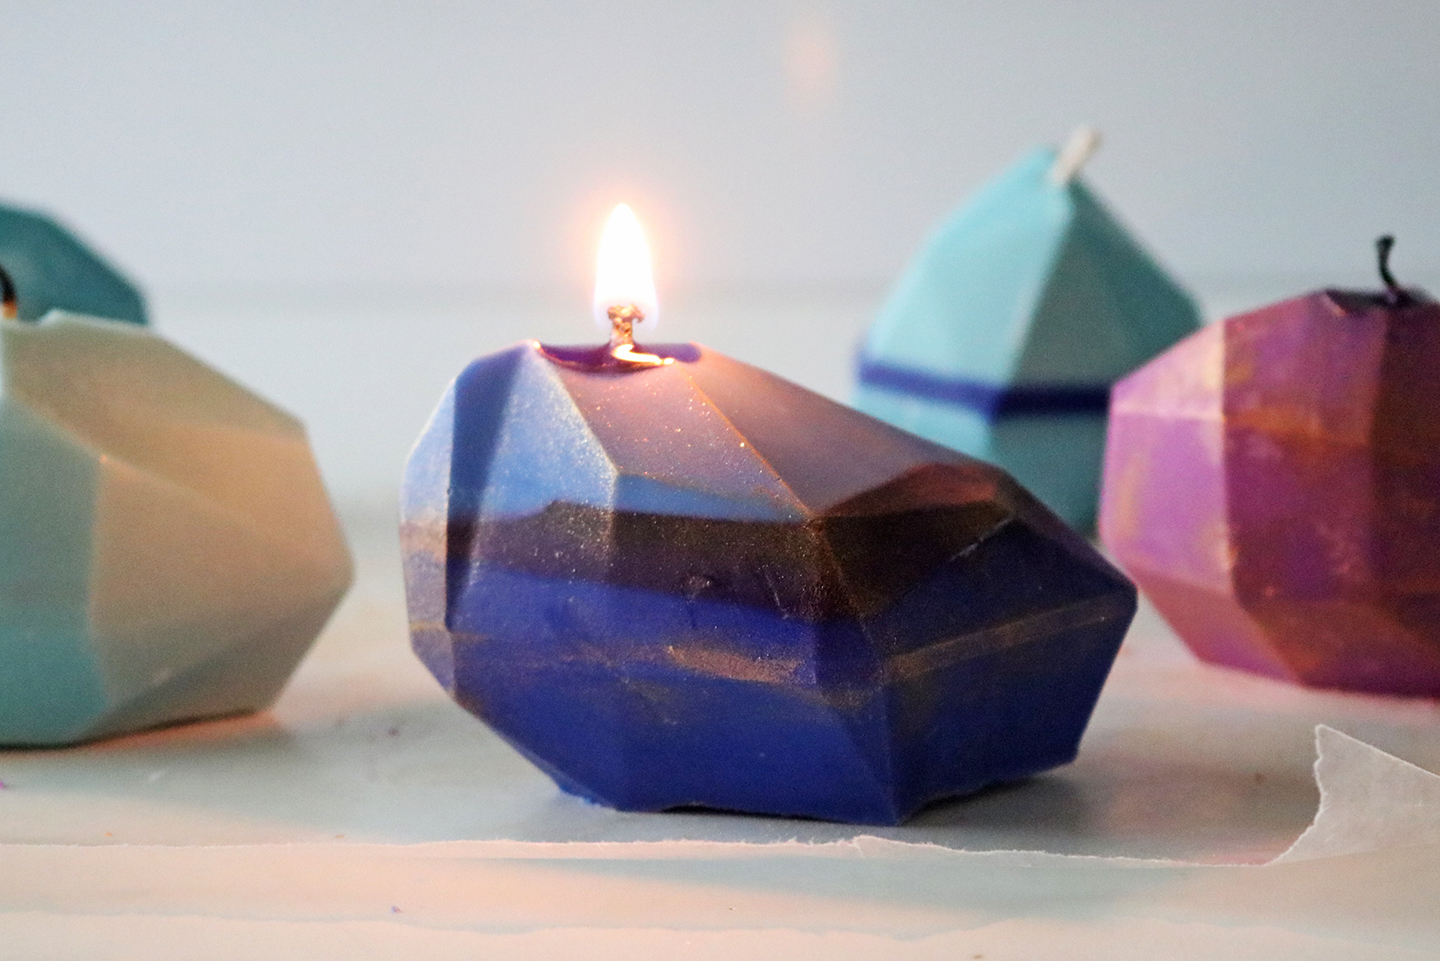 SIMPLE TUTORIAL - How To Make A Crystal Candle! 